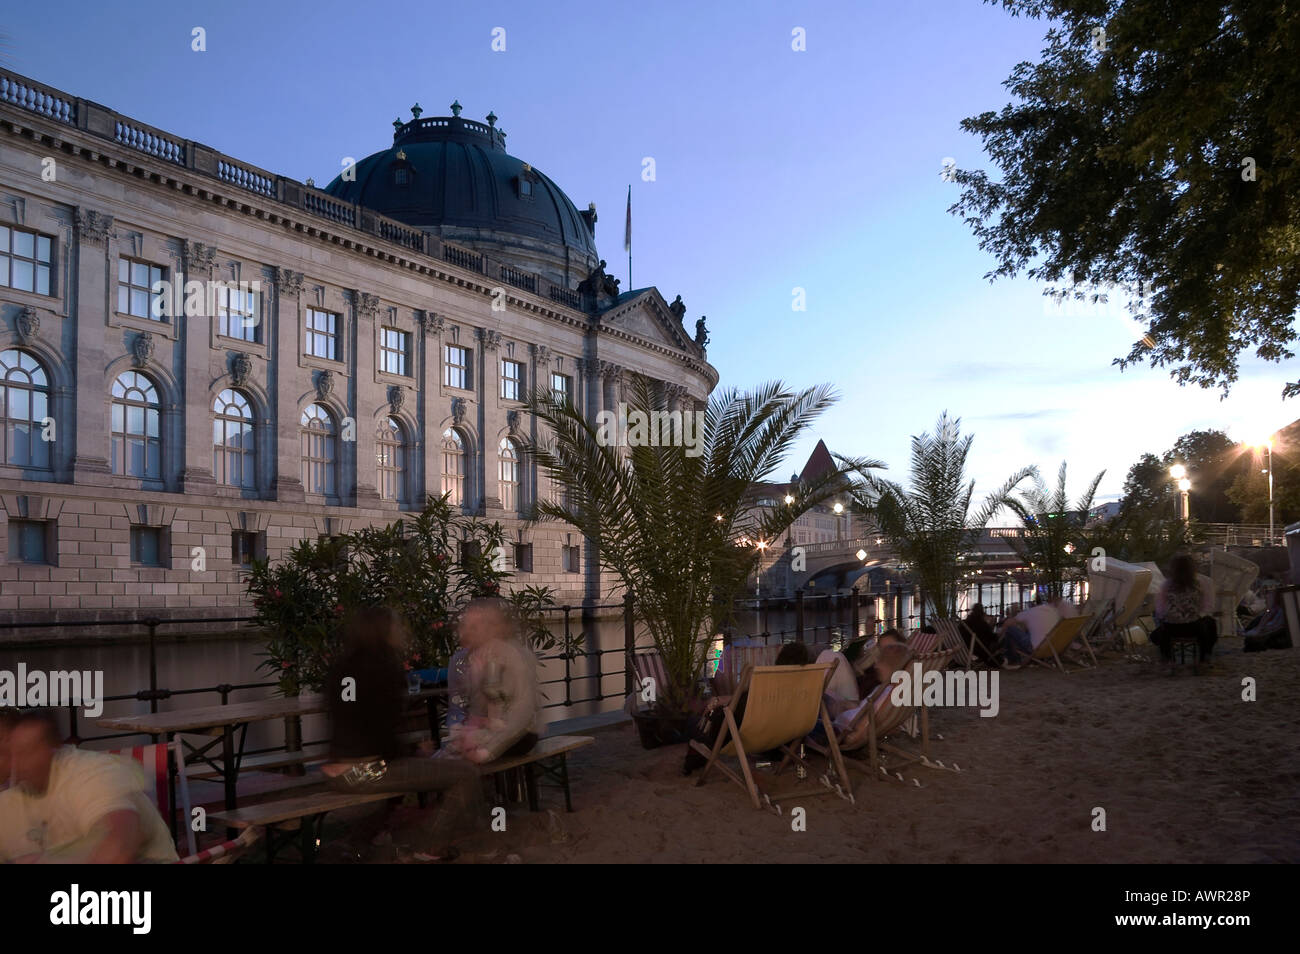 Beach bar along the Spree River, the Bode Museum across, UNESCO World Heritage Site, Berlin, Germany, Europe Stock Photo